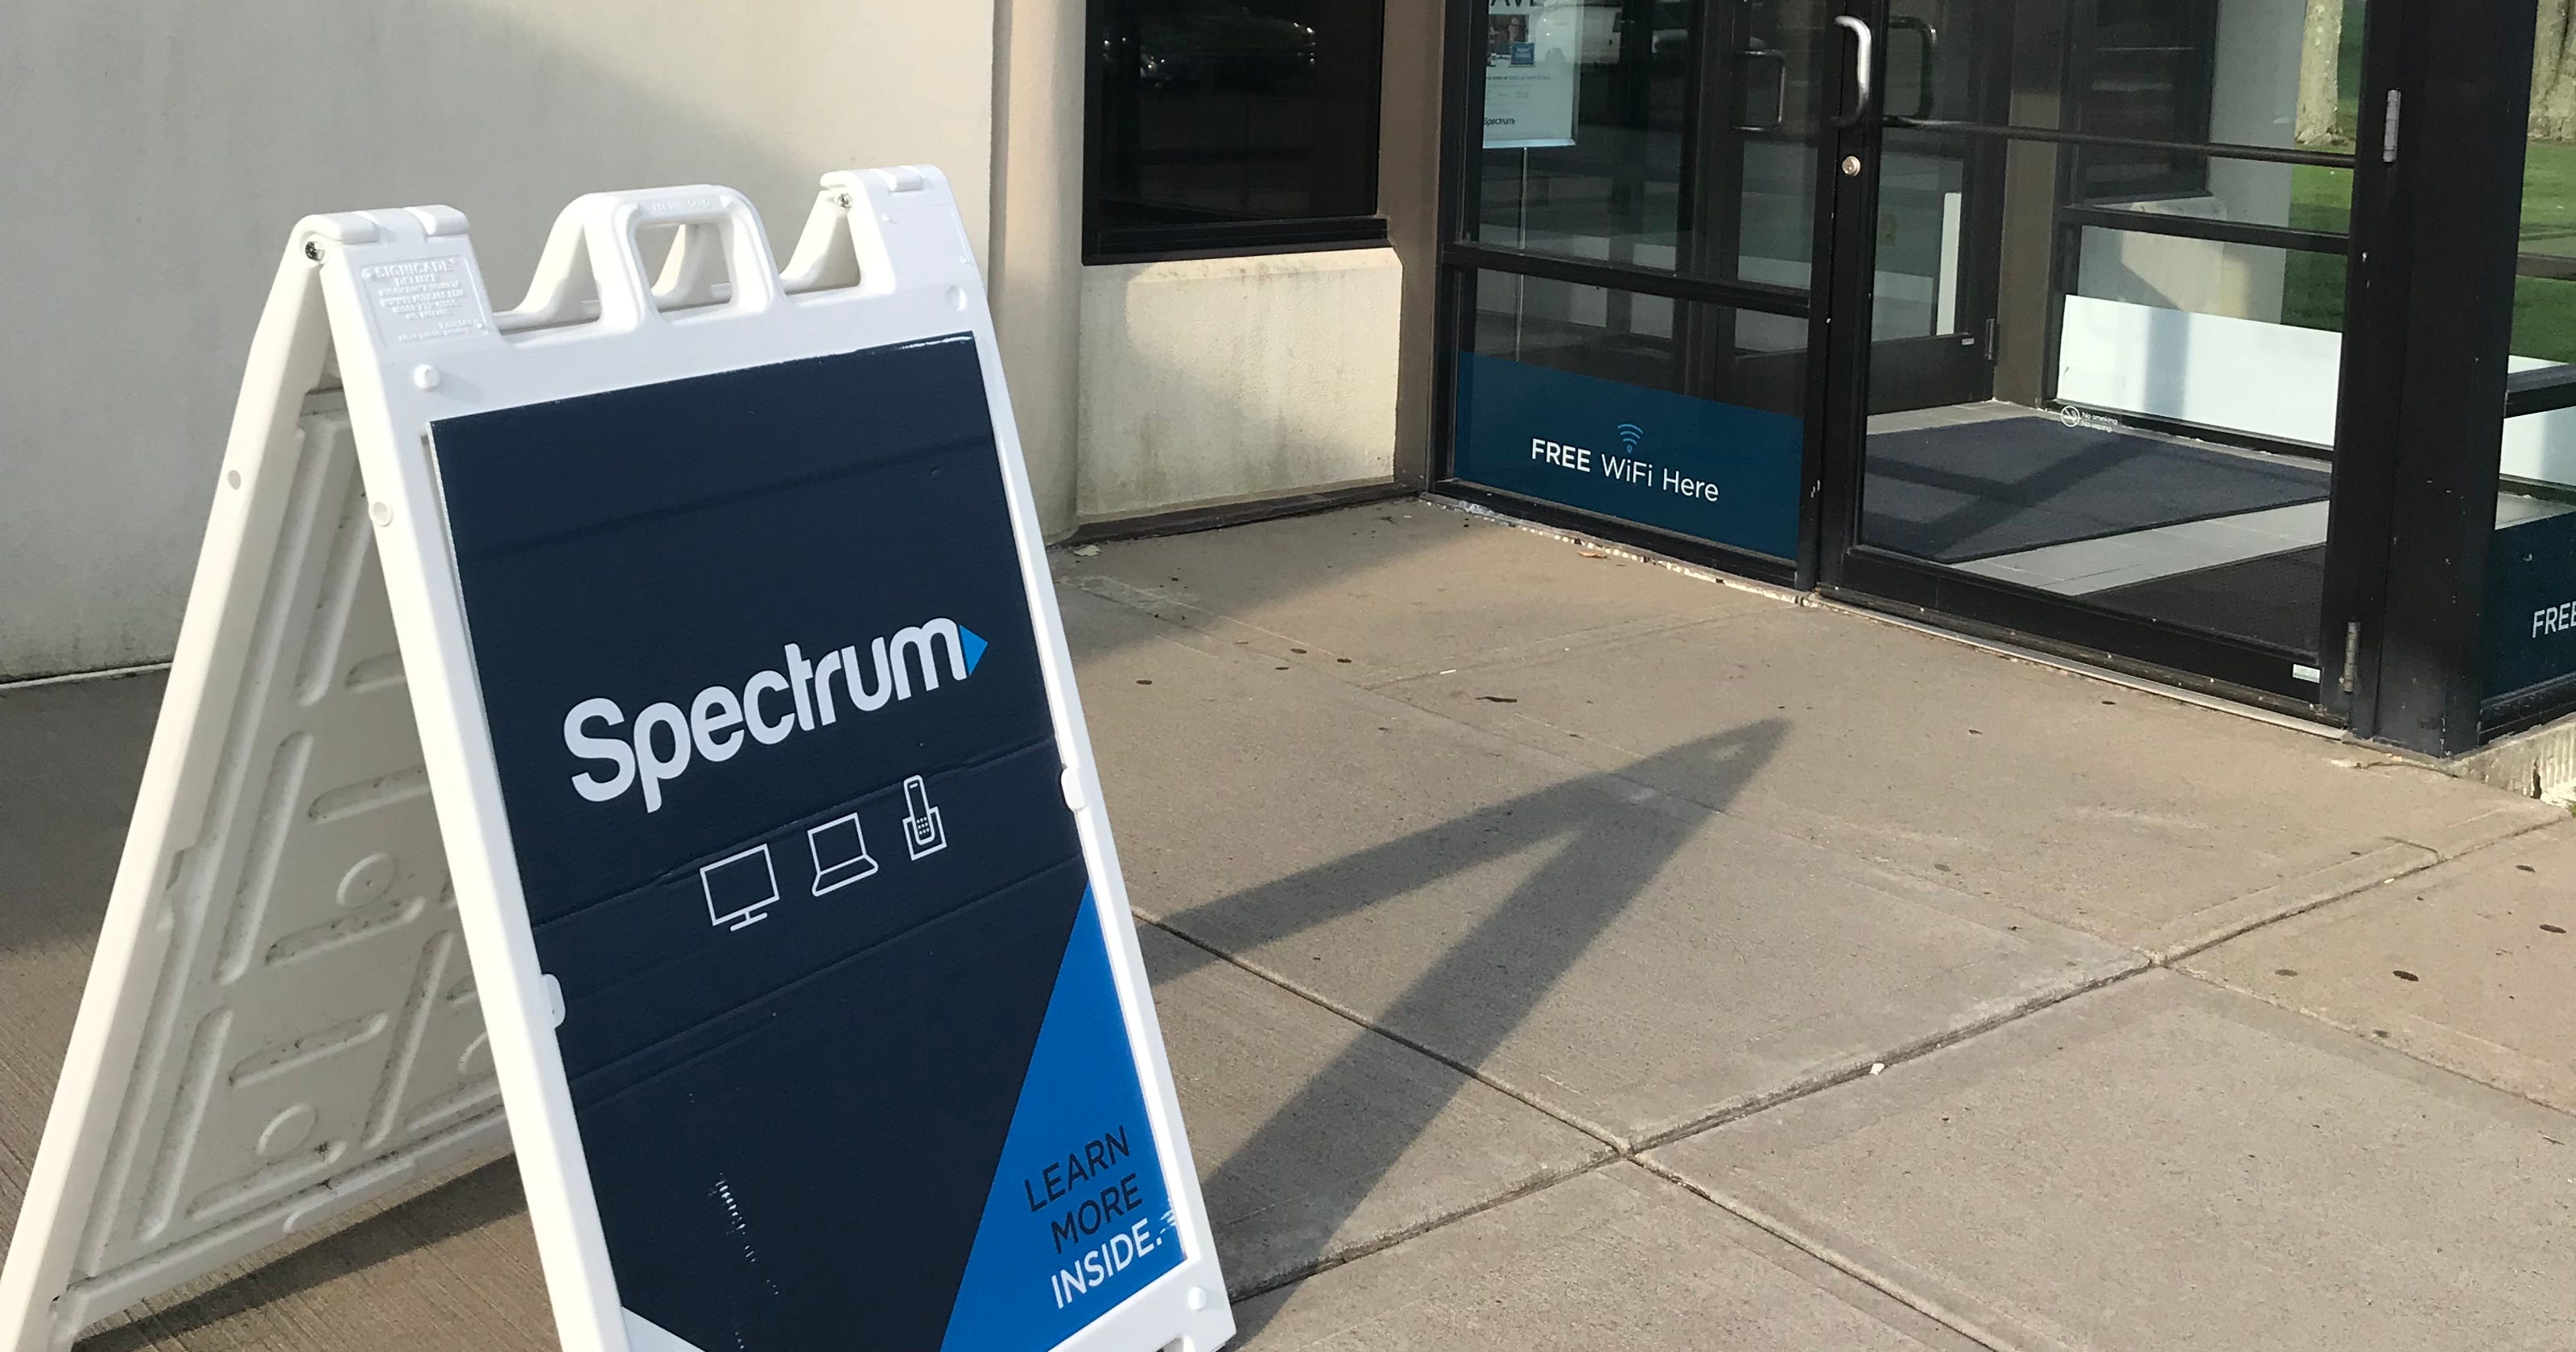 Charter/Spectrum to pay record $174.2M for defrauding NY customers